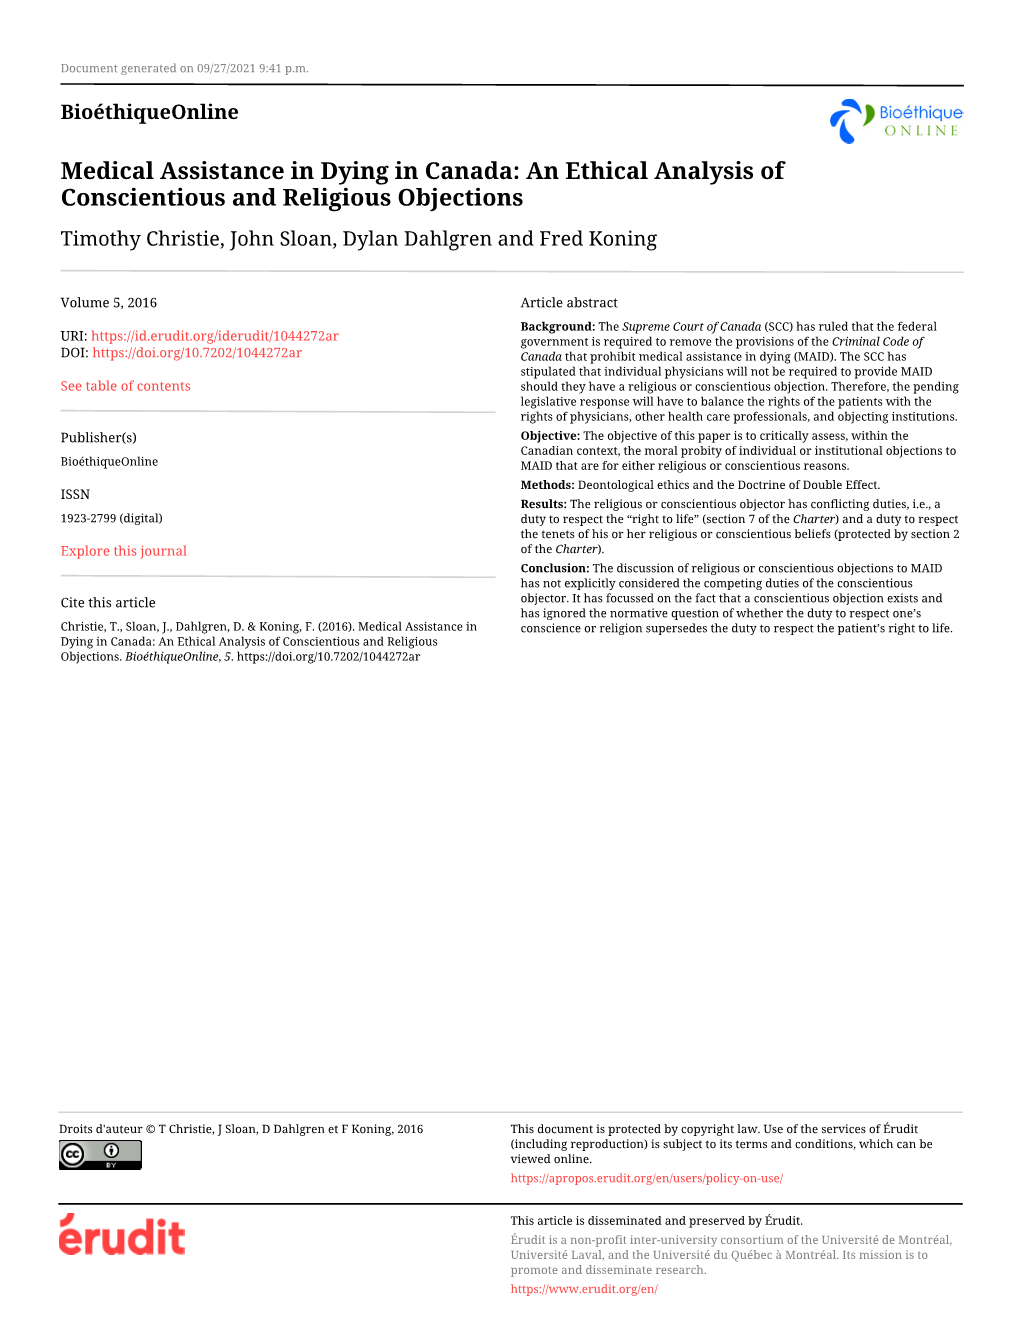 Medical Assistance in Dying in Canada: an Ethical Analysis of Conscientious and Religious Objections Timothy Christie, John Sloan, Dylan Dahlgren and Fred Koning